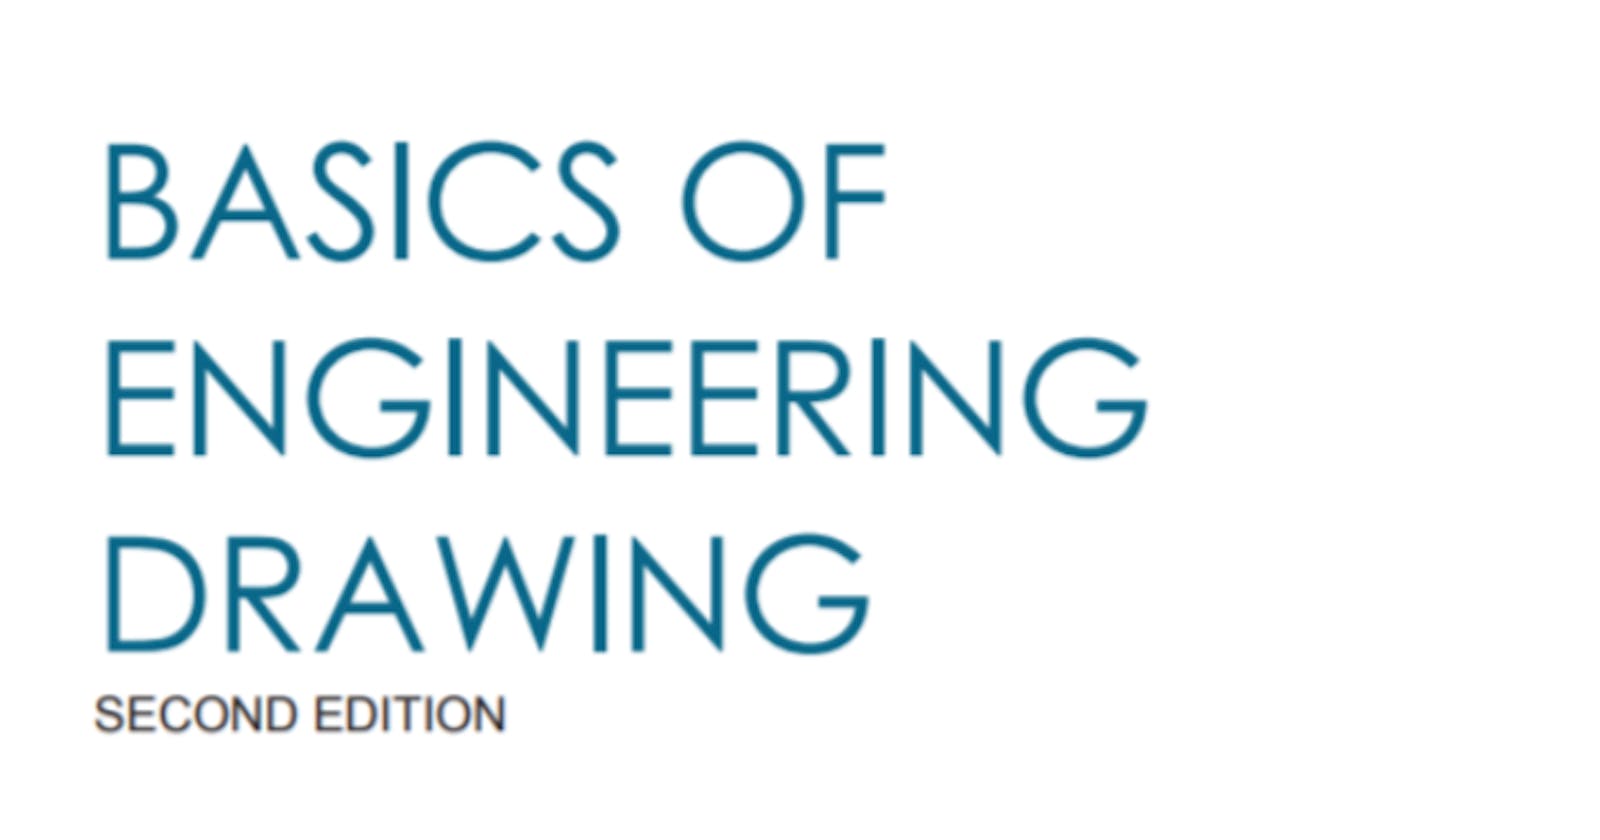 Basics of Engineering Drawing by Zahid Ahmed Siddiqui full book pdf format.